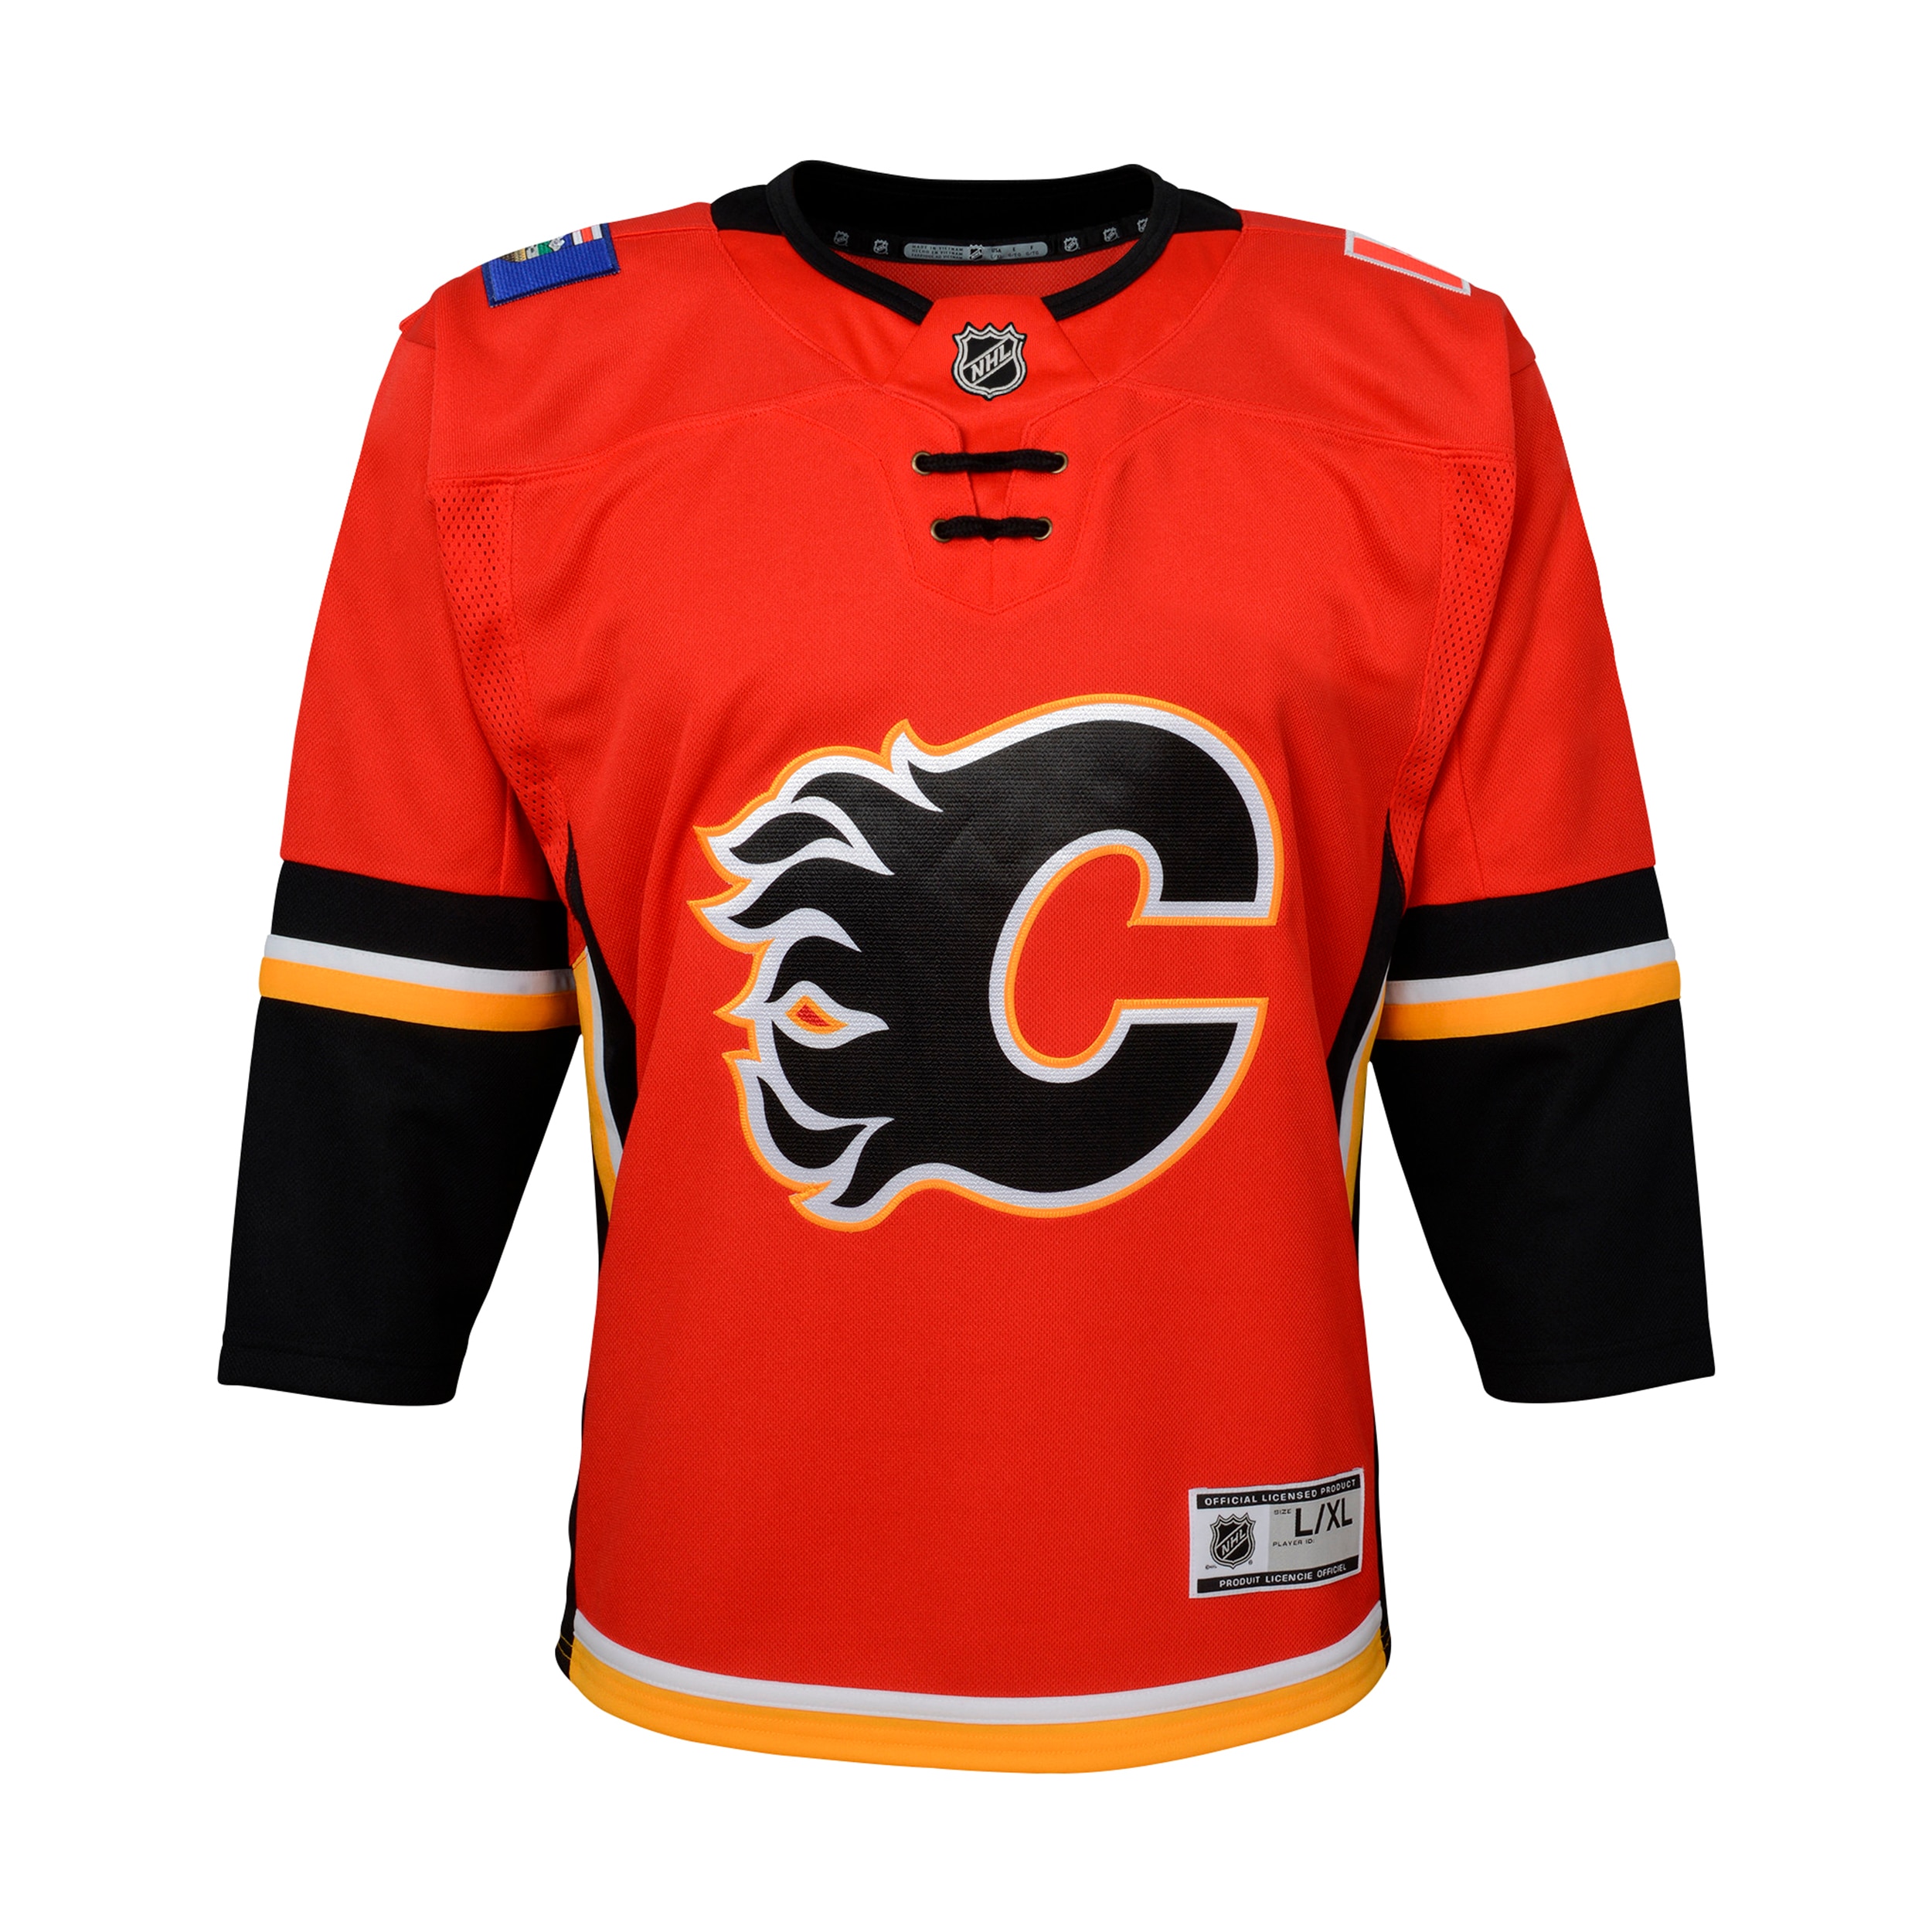 sports jersey online shopping